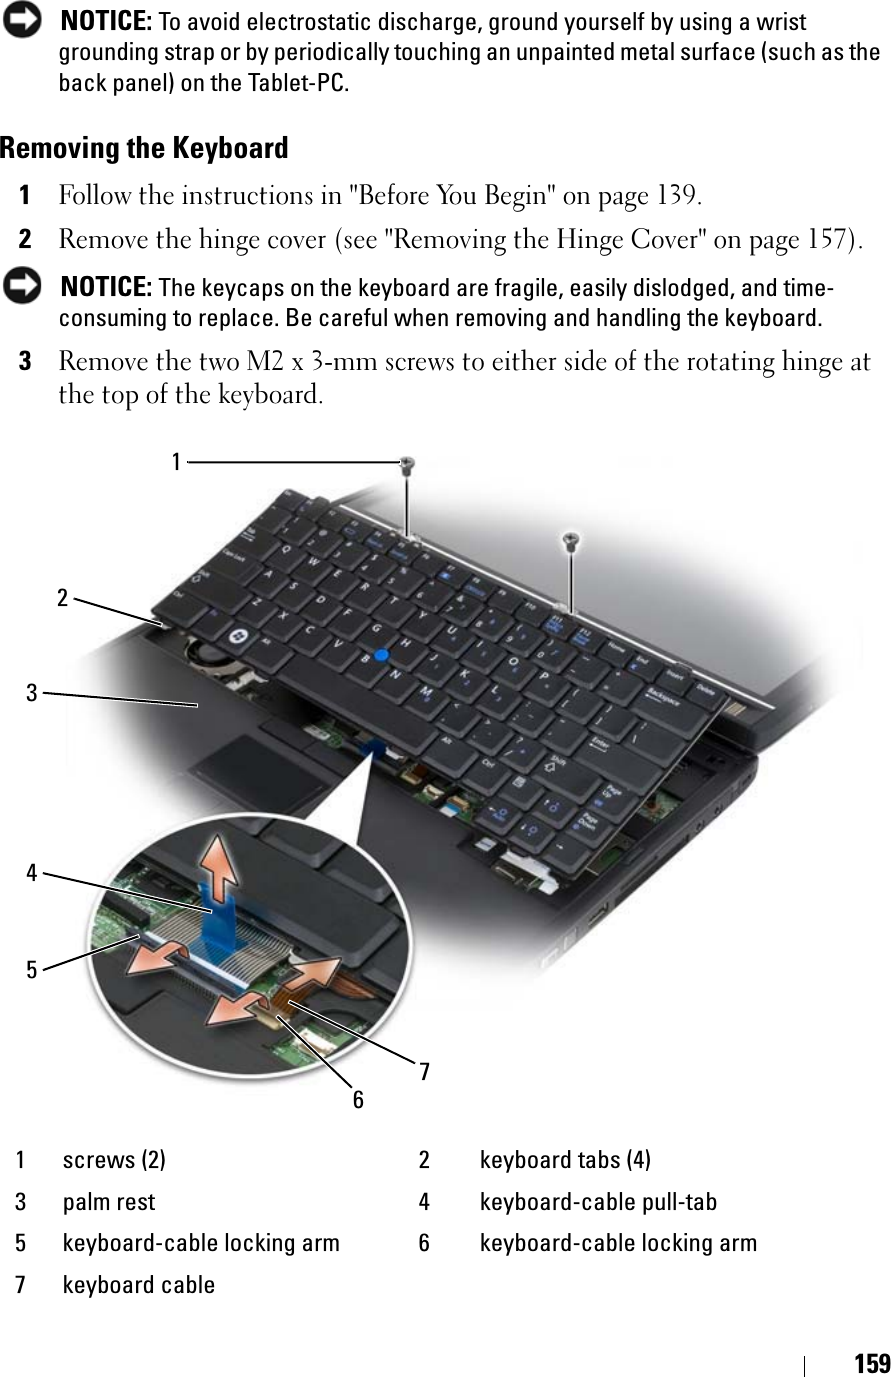 159NOTICE: To avoid electrostatic discharge, ground yourself by using a wrist grounding strap or by periodically touching an unpainted metal surface (such as the back panel) on the Tablet-PC.Removing the Keyboard1Follow the instructions in &quot;Before You Begin&quot; on page 139.2Remove the hinge cover (see &quot;Removing the Hinge Cover&quot; on page 157).NOTICE: The keycaps on the keyboard are fragile, easily dislodged, and time-consuming to replace. Be careful when removing and handling the keyboard.3Remove the two M2 x 3-mm screws to either side of the rotating hinge at the top of the keyboard.1 screws (2) 2 keyboard tabs (4)3 palm rest 4 keyboard-cable pull-tab5 keyboard-cable locking arm 6 keyboard-cable locking arm7 keyboard cable2134567